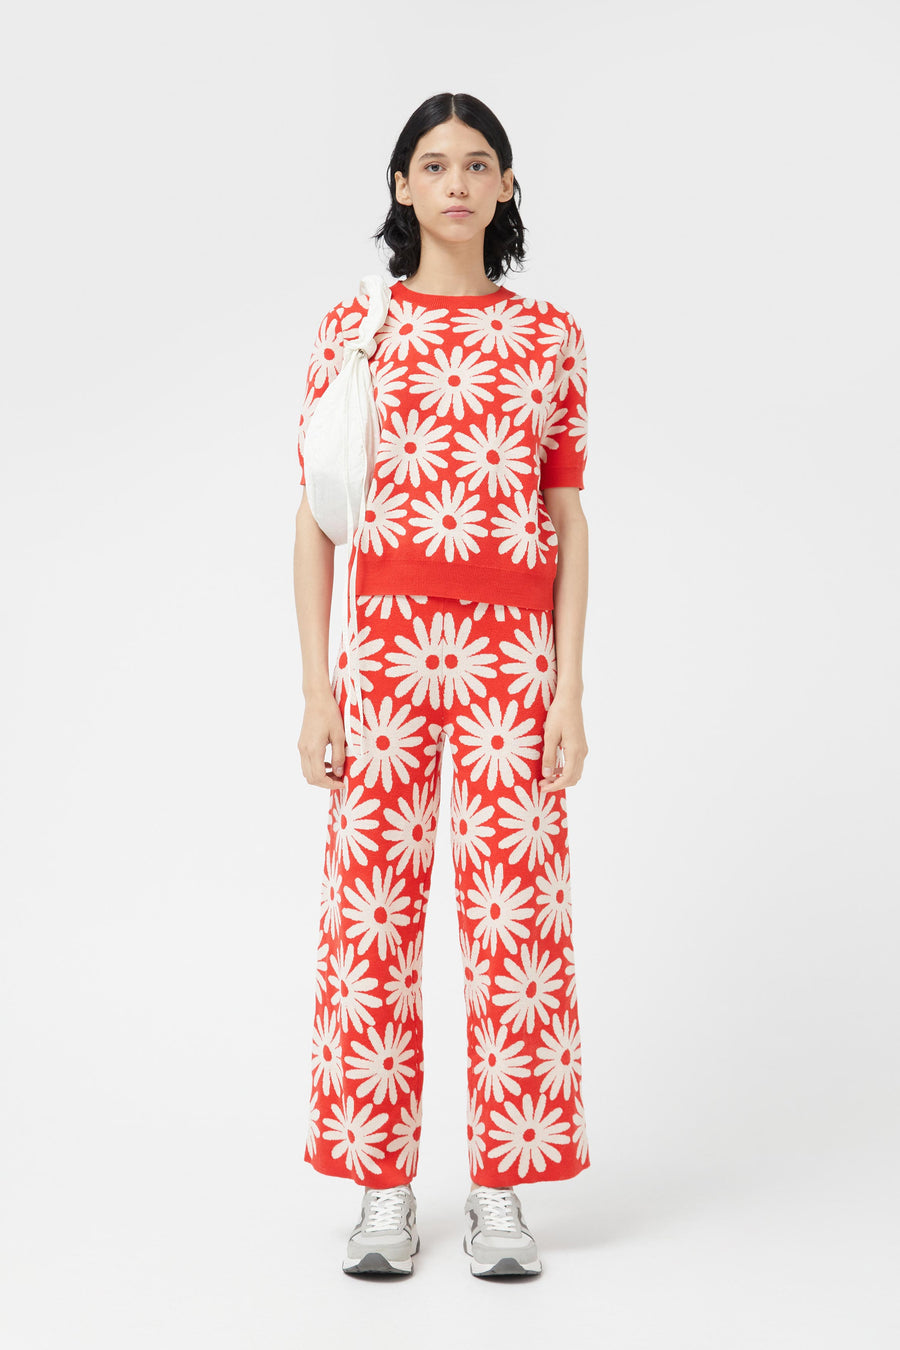 Floral Jacquard Top in Red and White